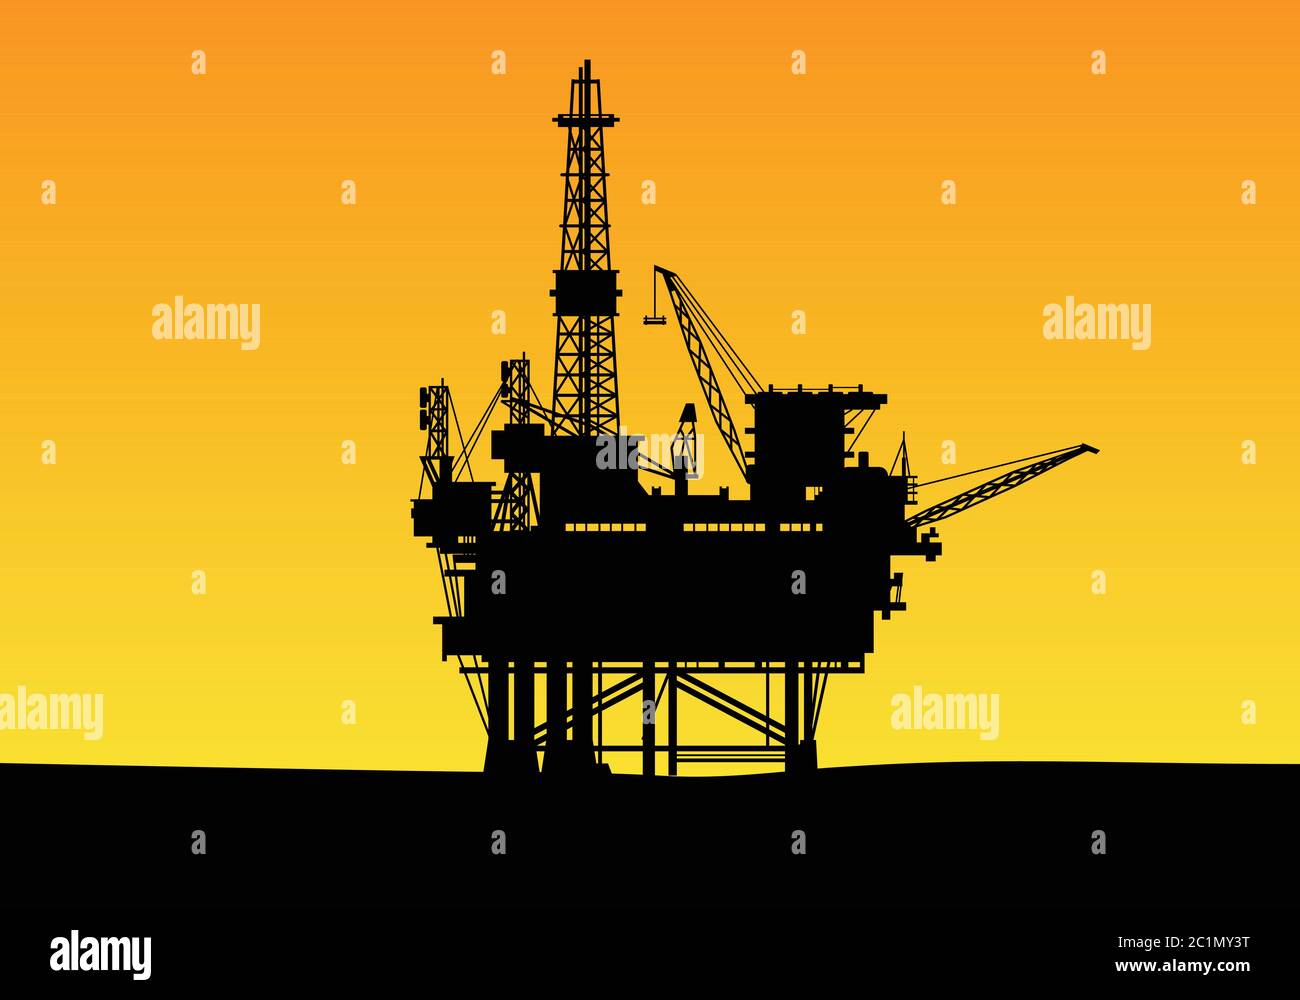 silhouette of an offshore oil drilling construction with high towers and crane. Suitable for gas and energy company background design template. Stock Vector